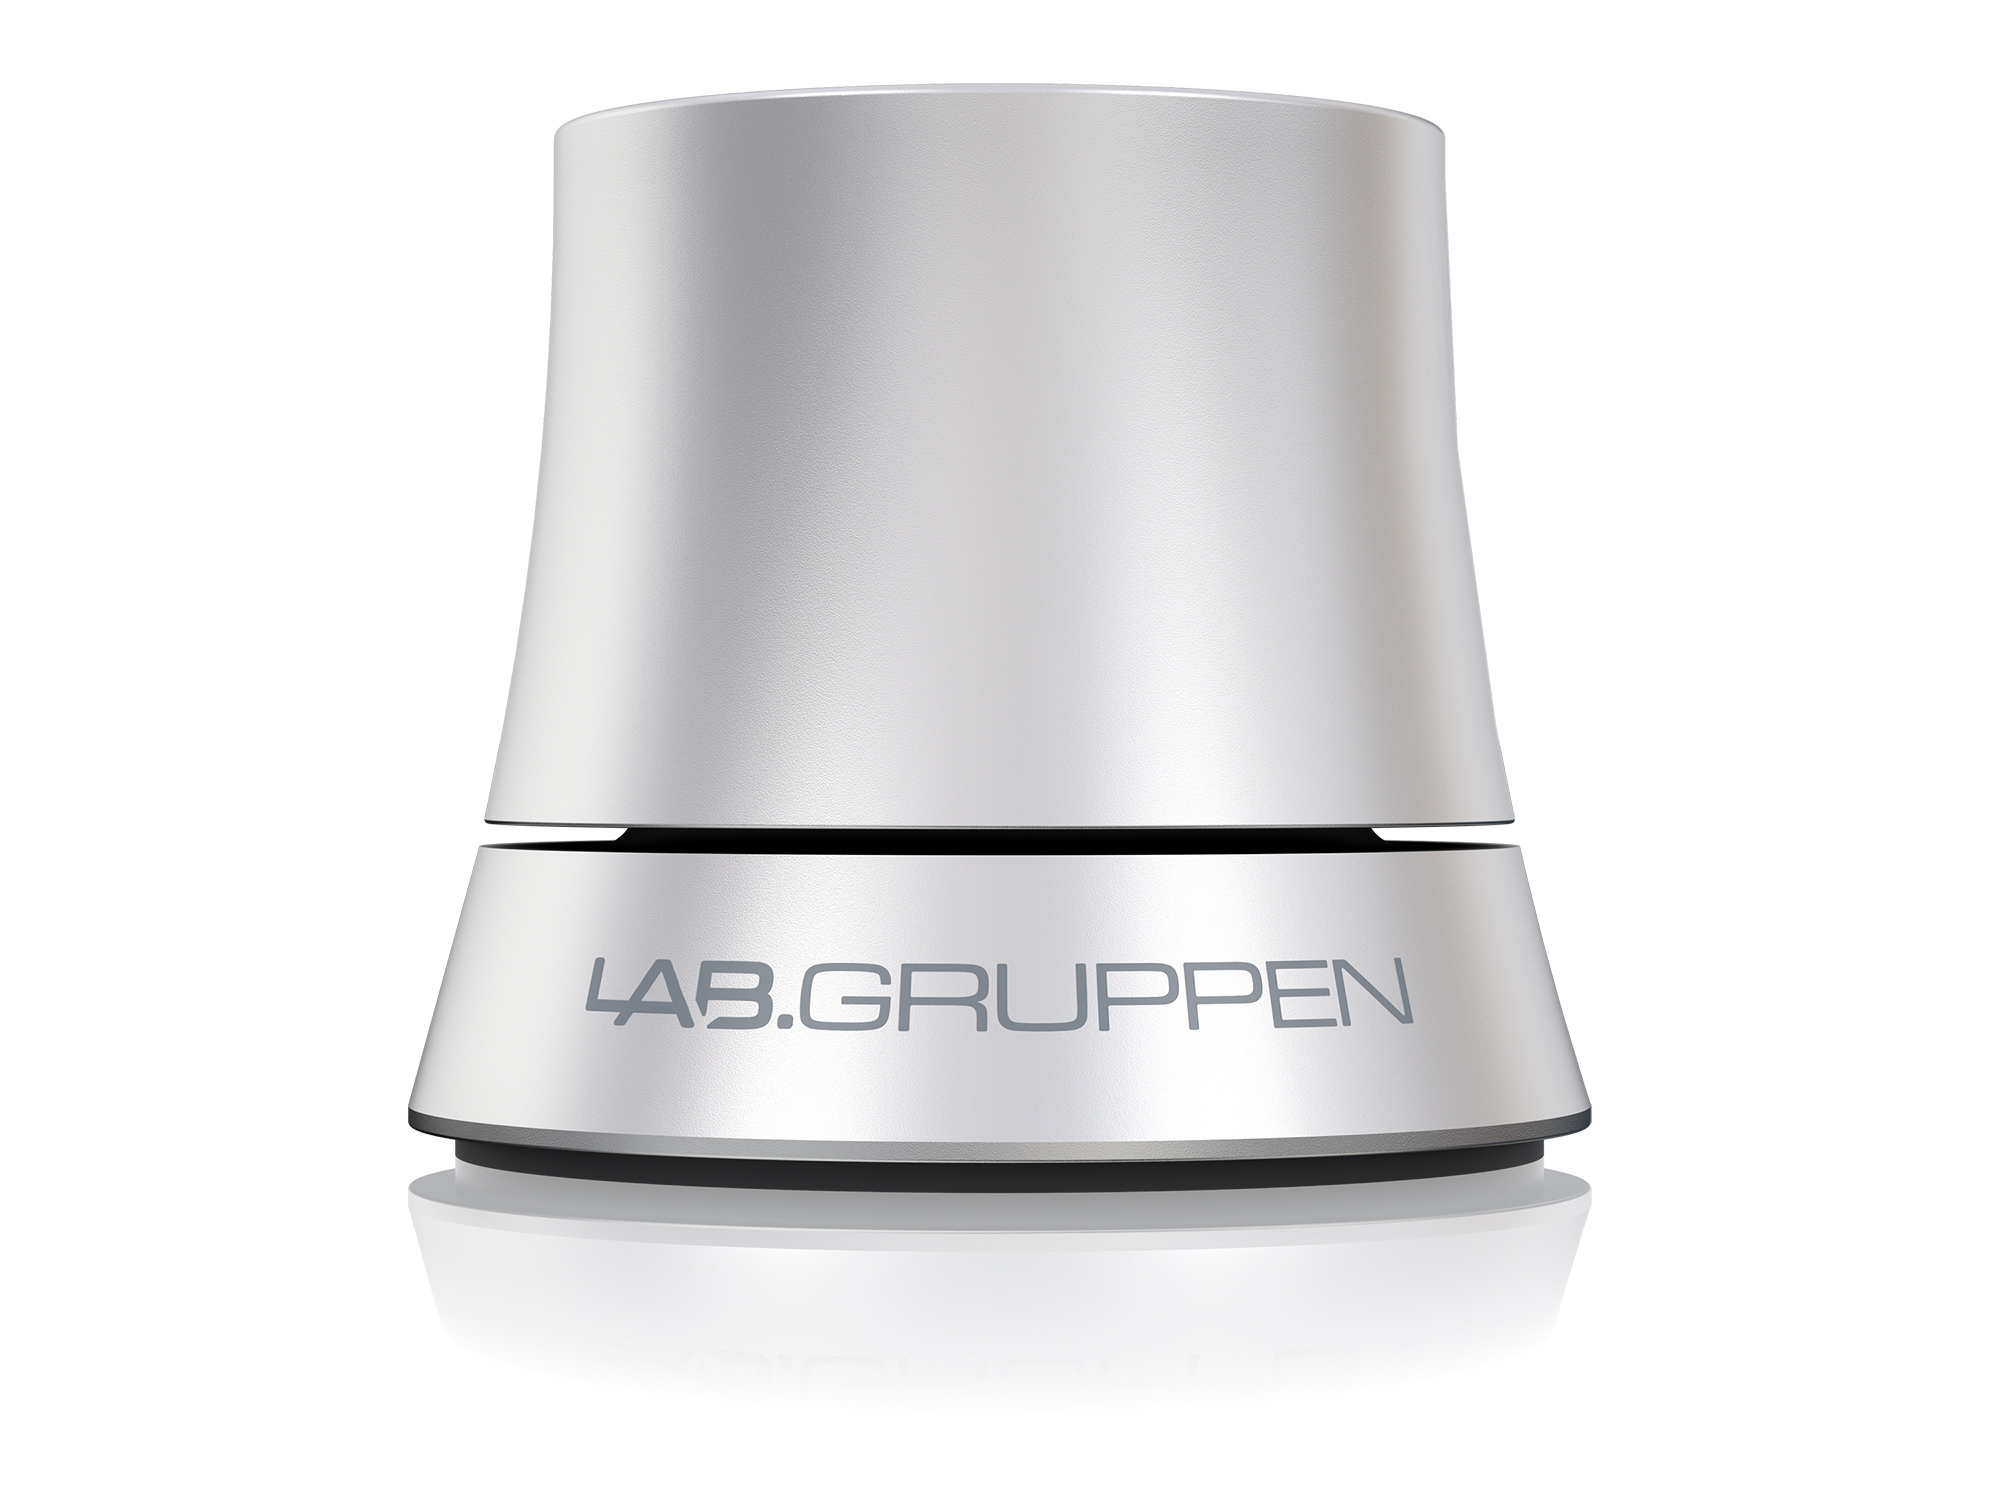 LAB.LEVEL4 Tabletop Volume Controller for Commercial Install Series and LUCIA Amplifiers by Lab.gruppen